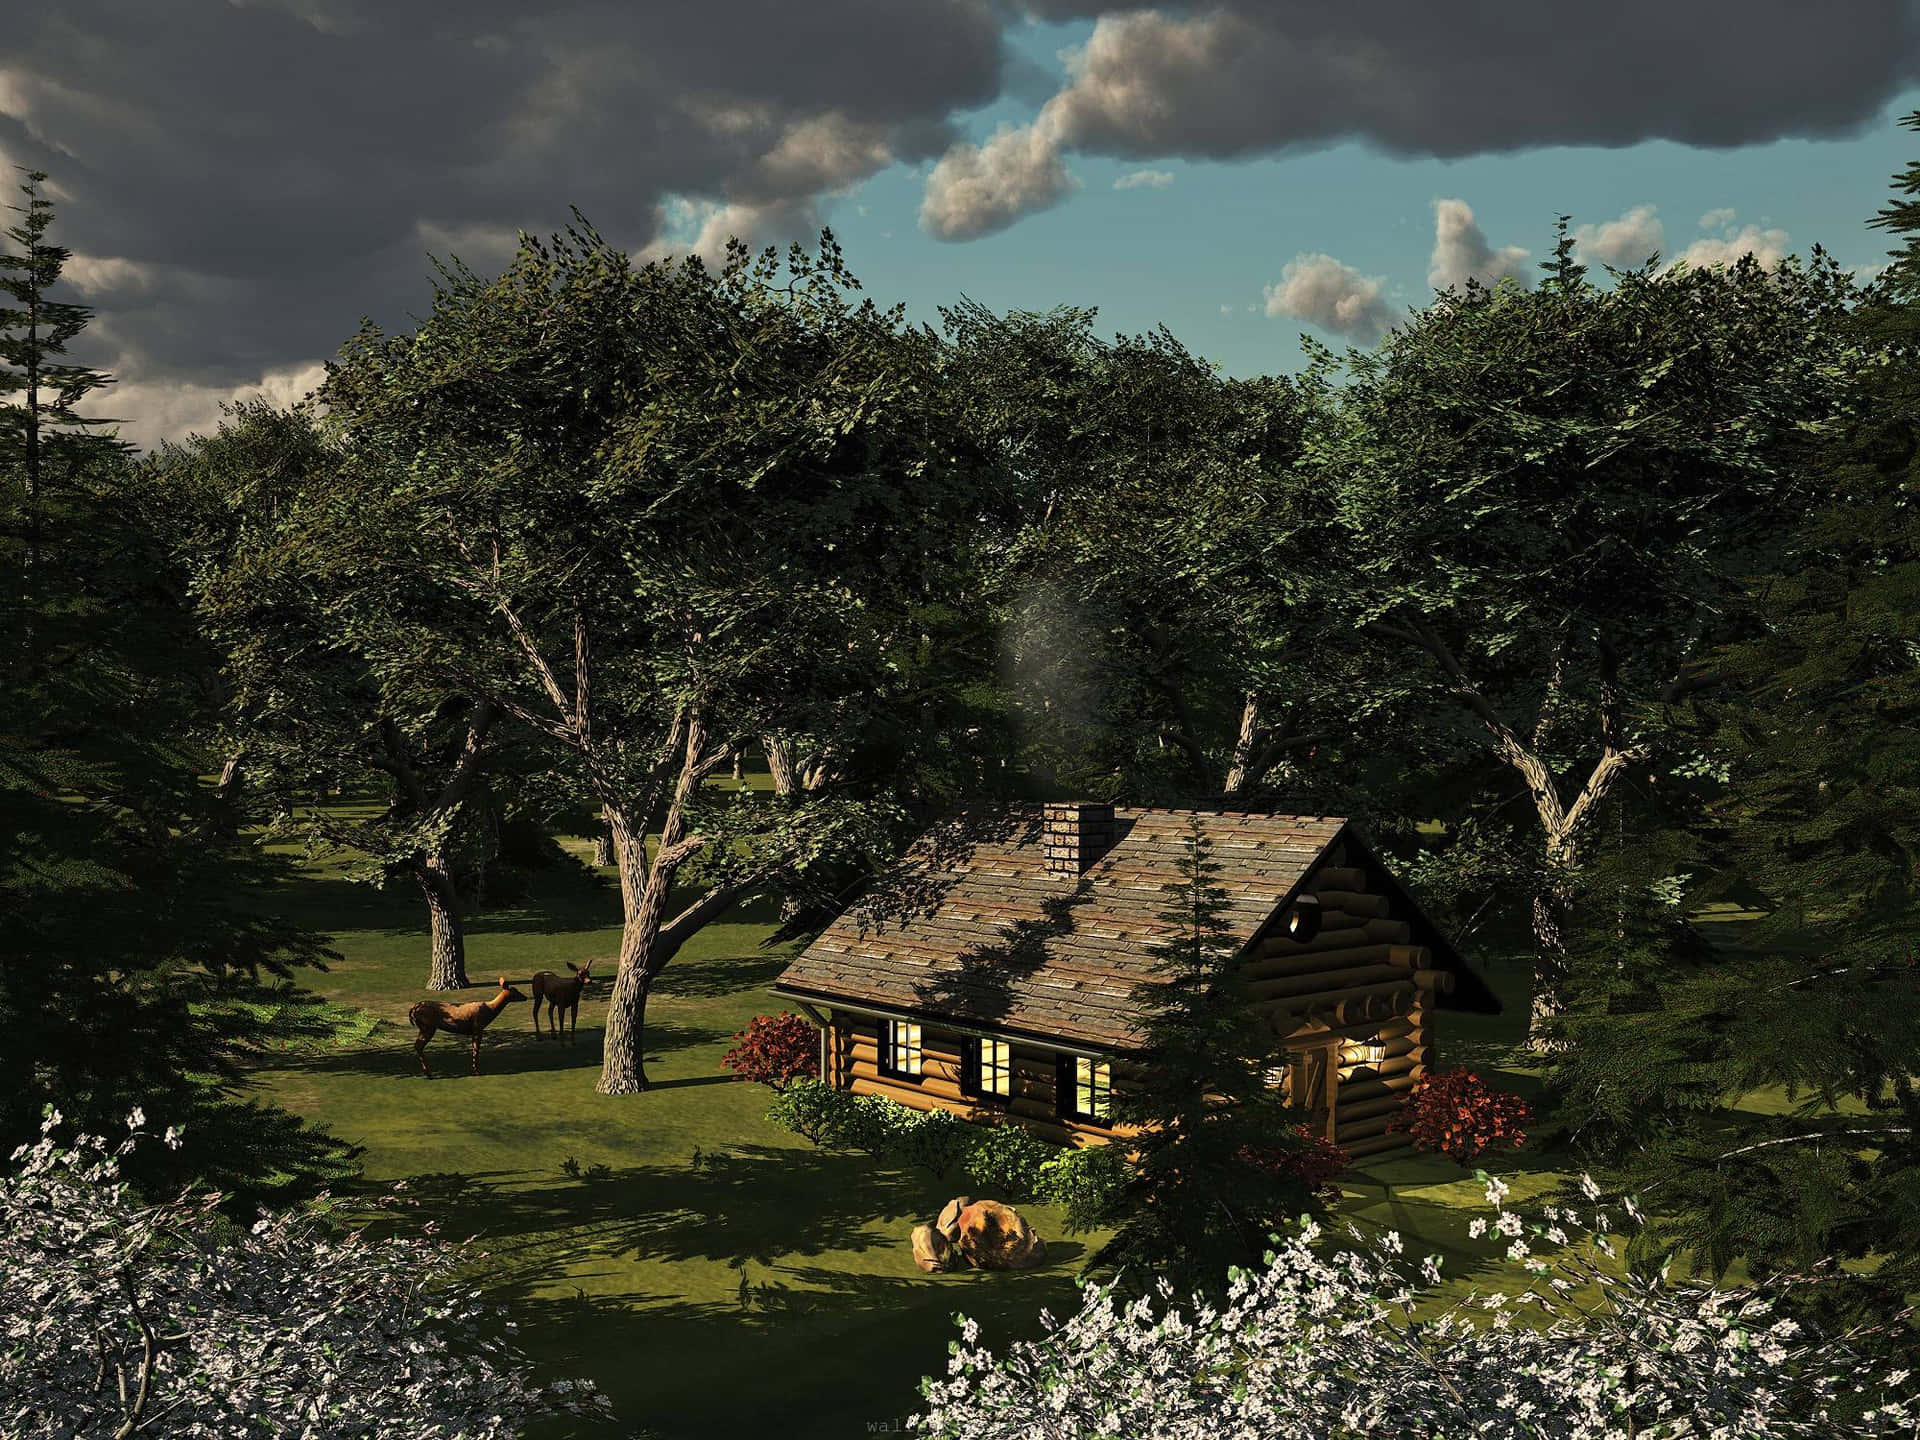 Cabin Painting In The Forest Wallpaper